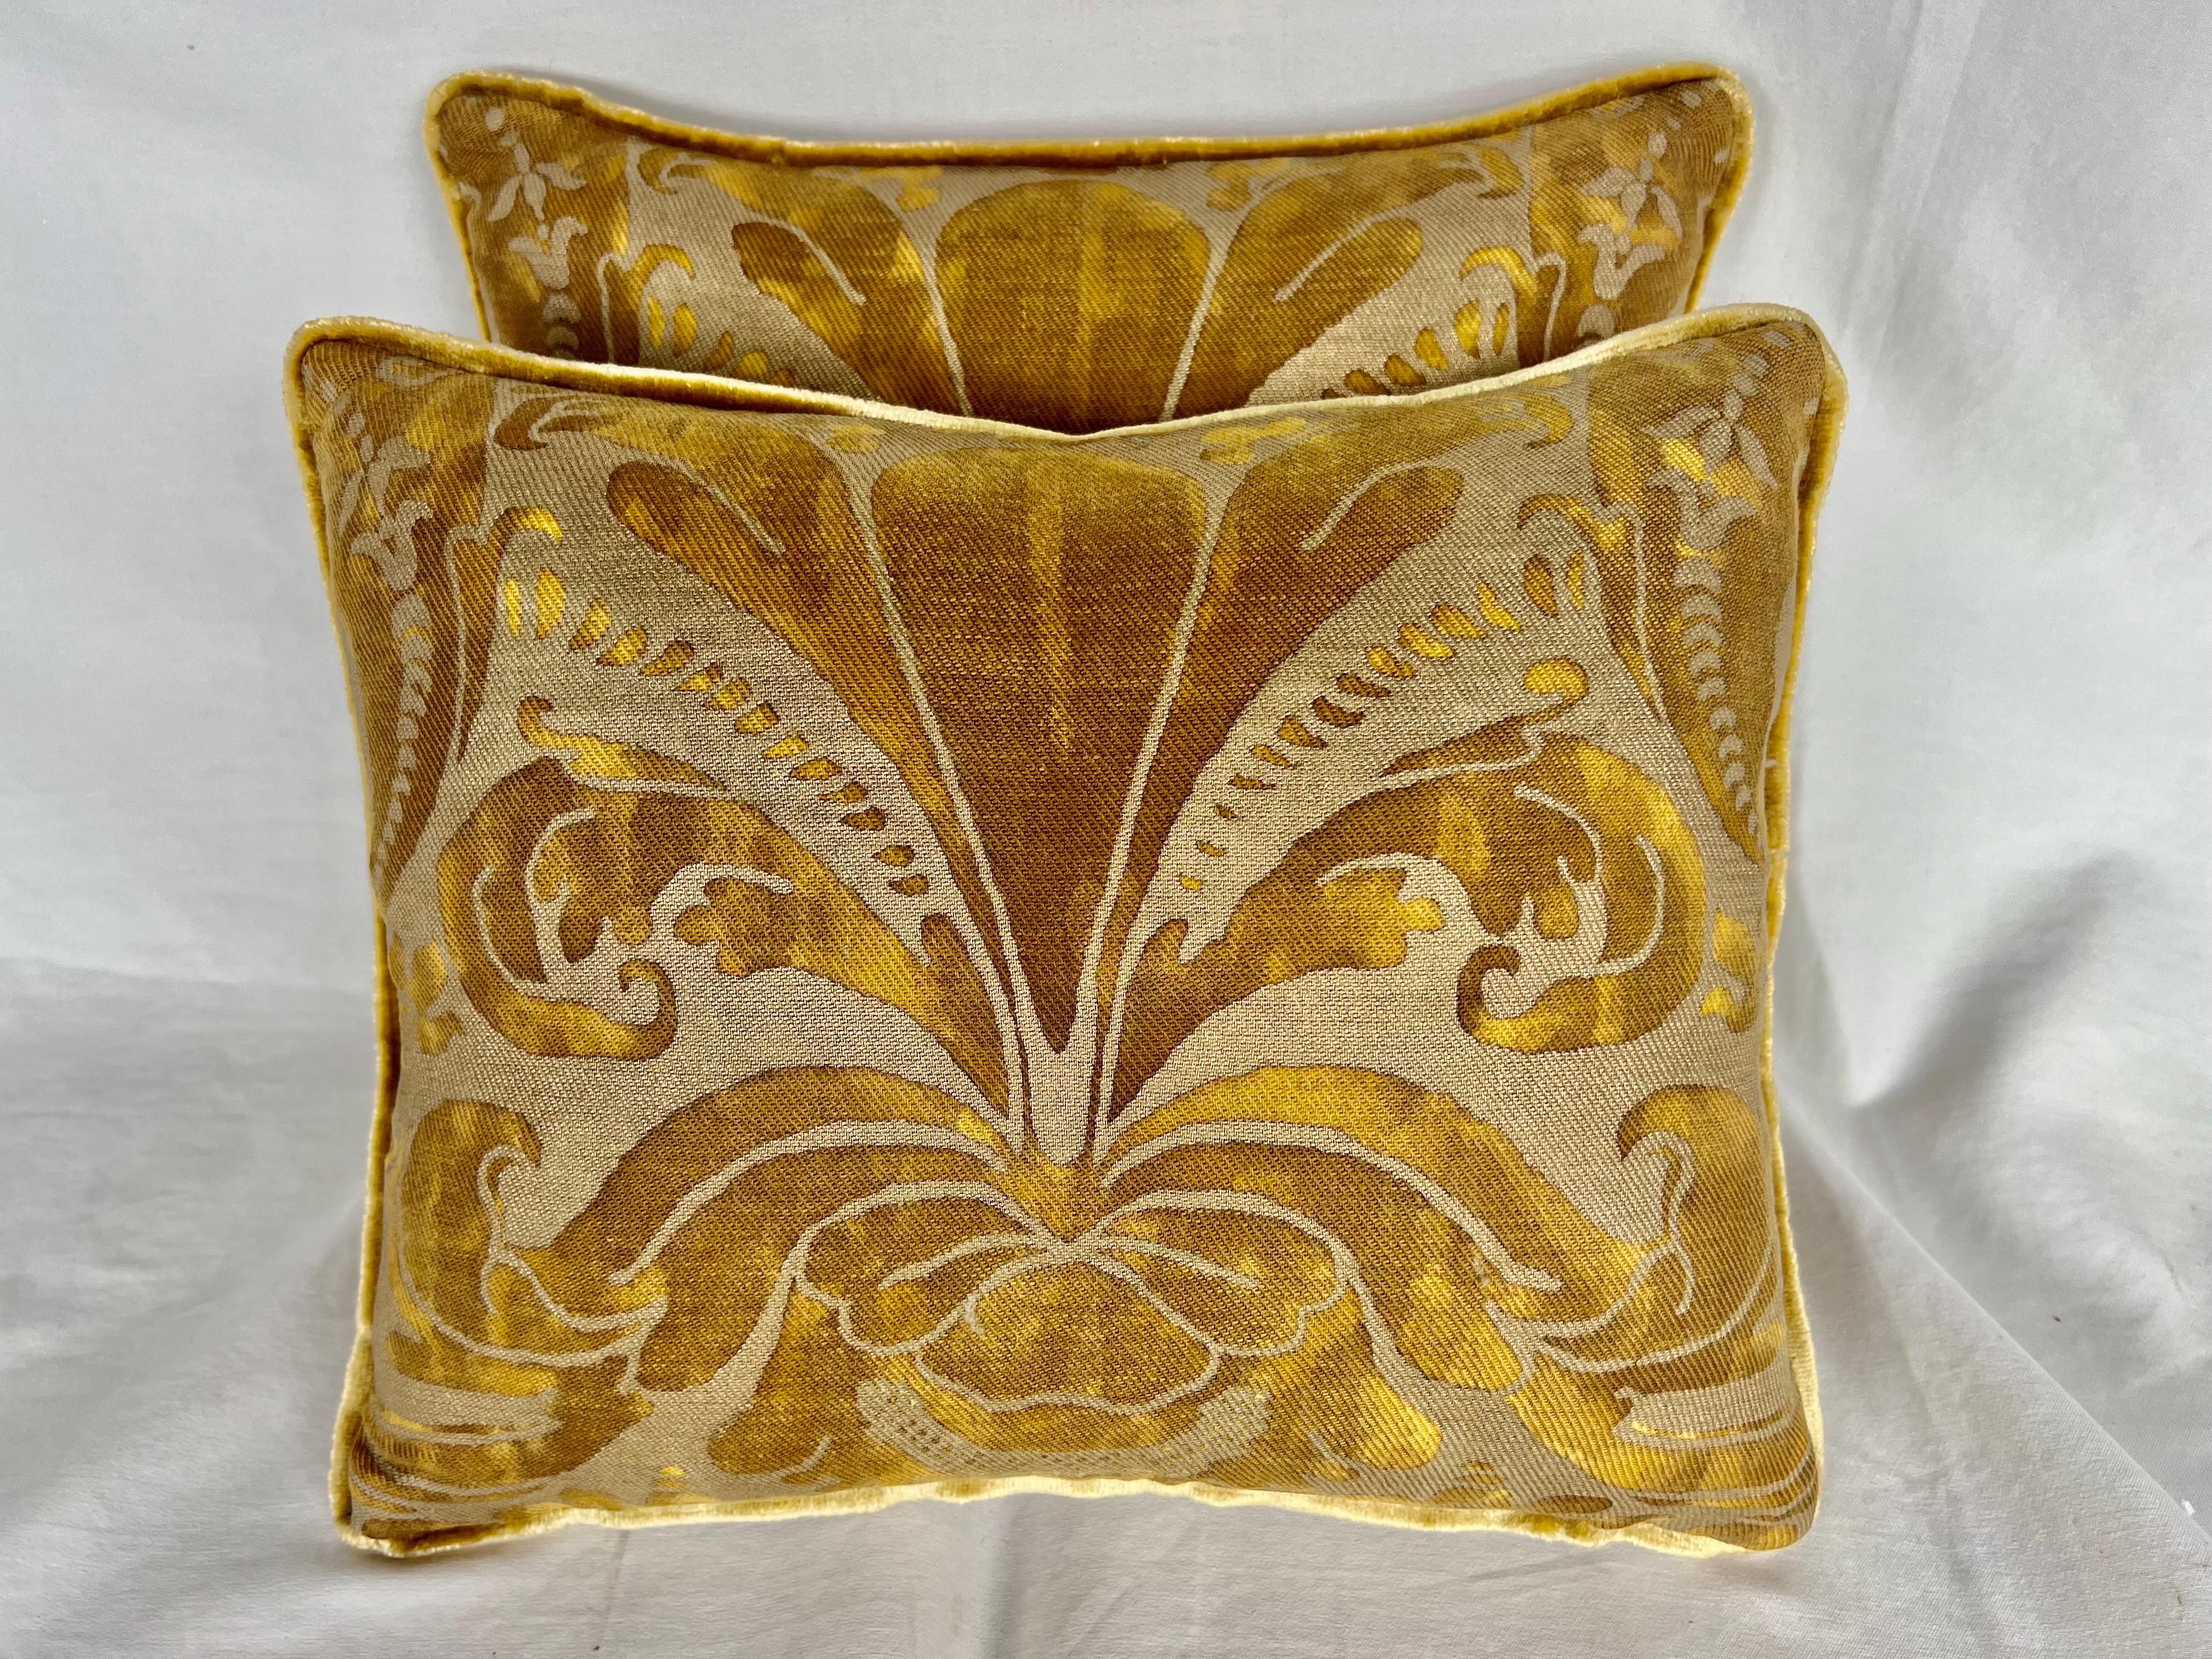 Pair of custom pillows made with vintage gold Fortuny textle fronts and golden velvet backs. Self welt, down inserts, zipper closures.